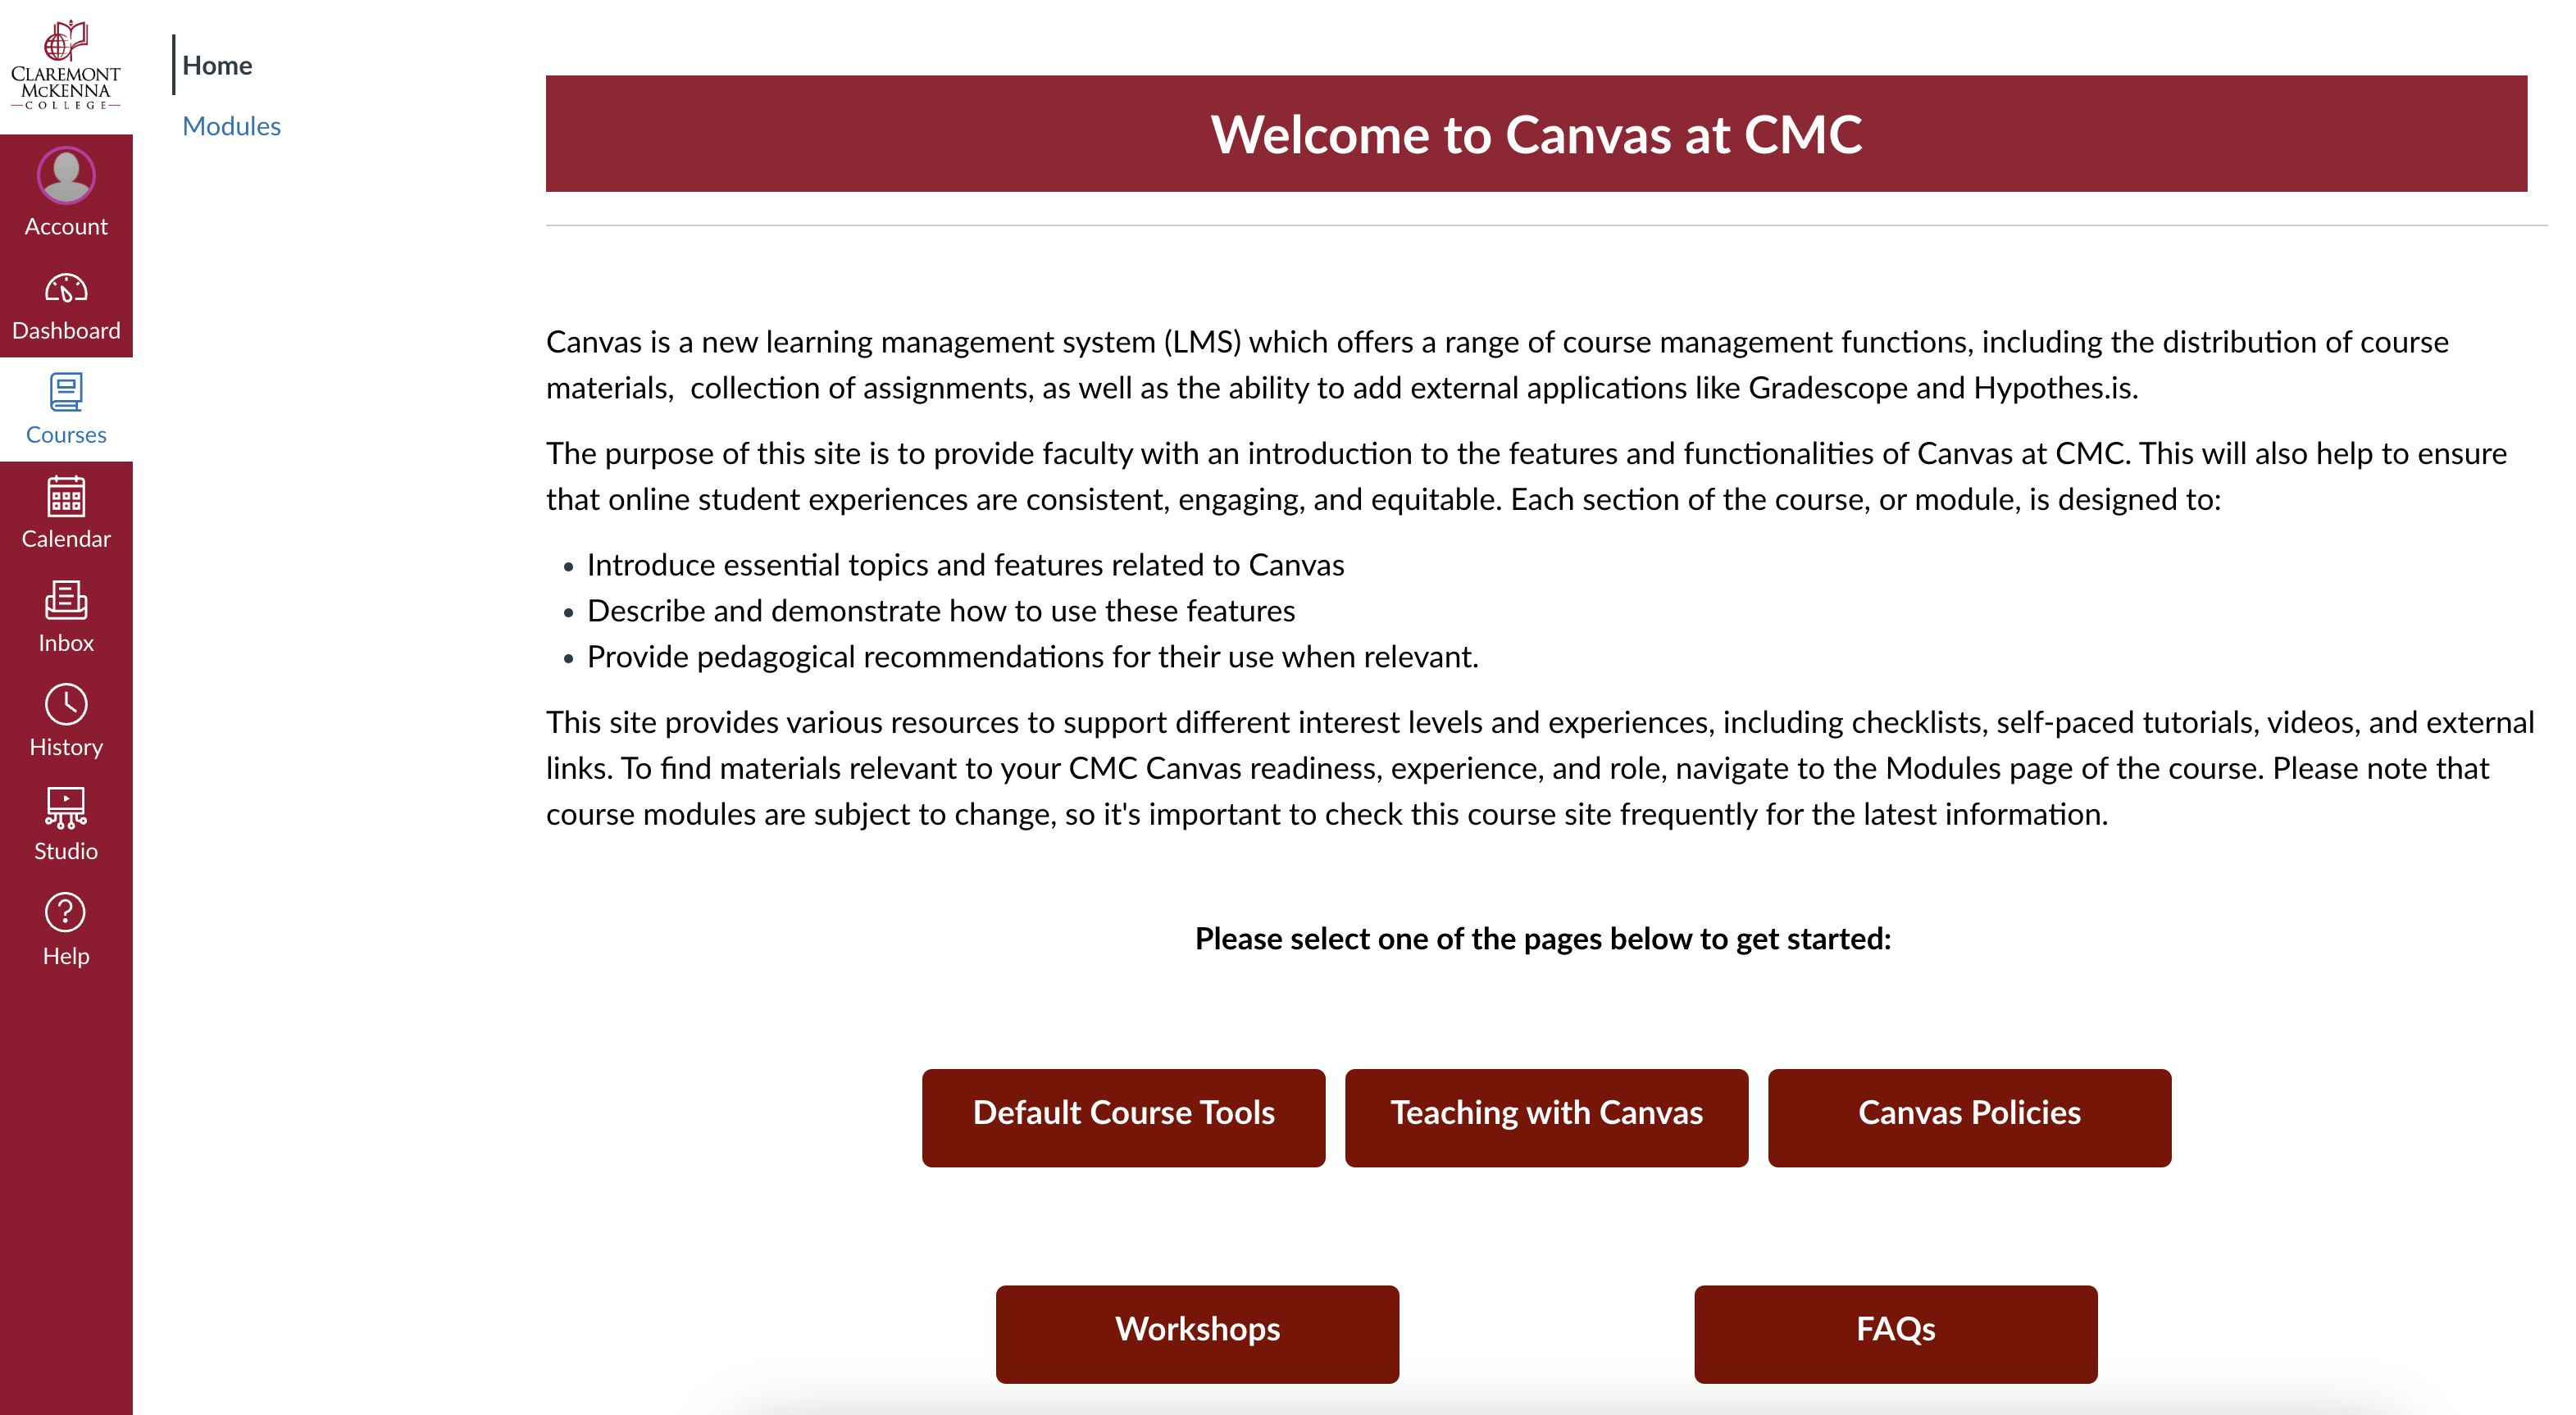 "Welcome to Canvas at CMC" course site